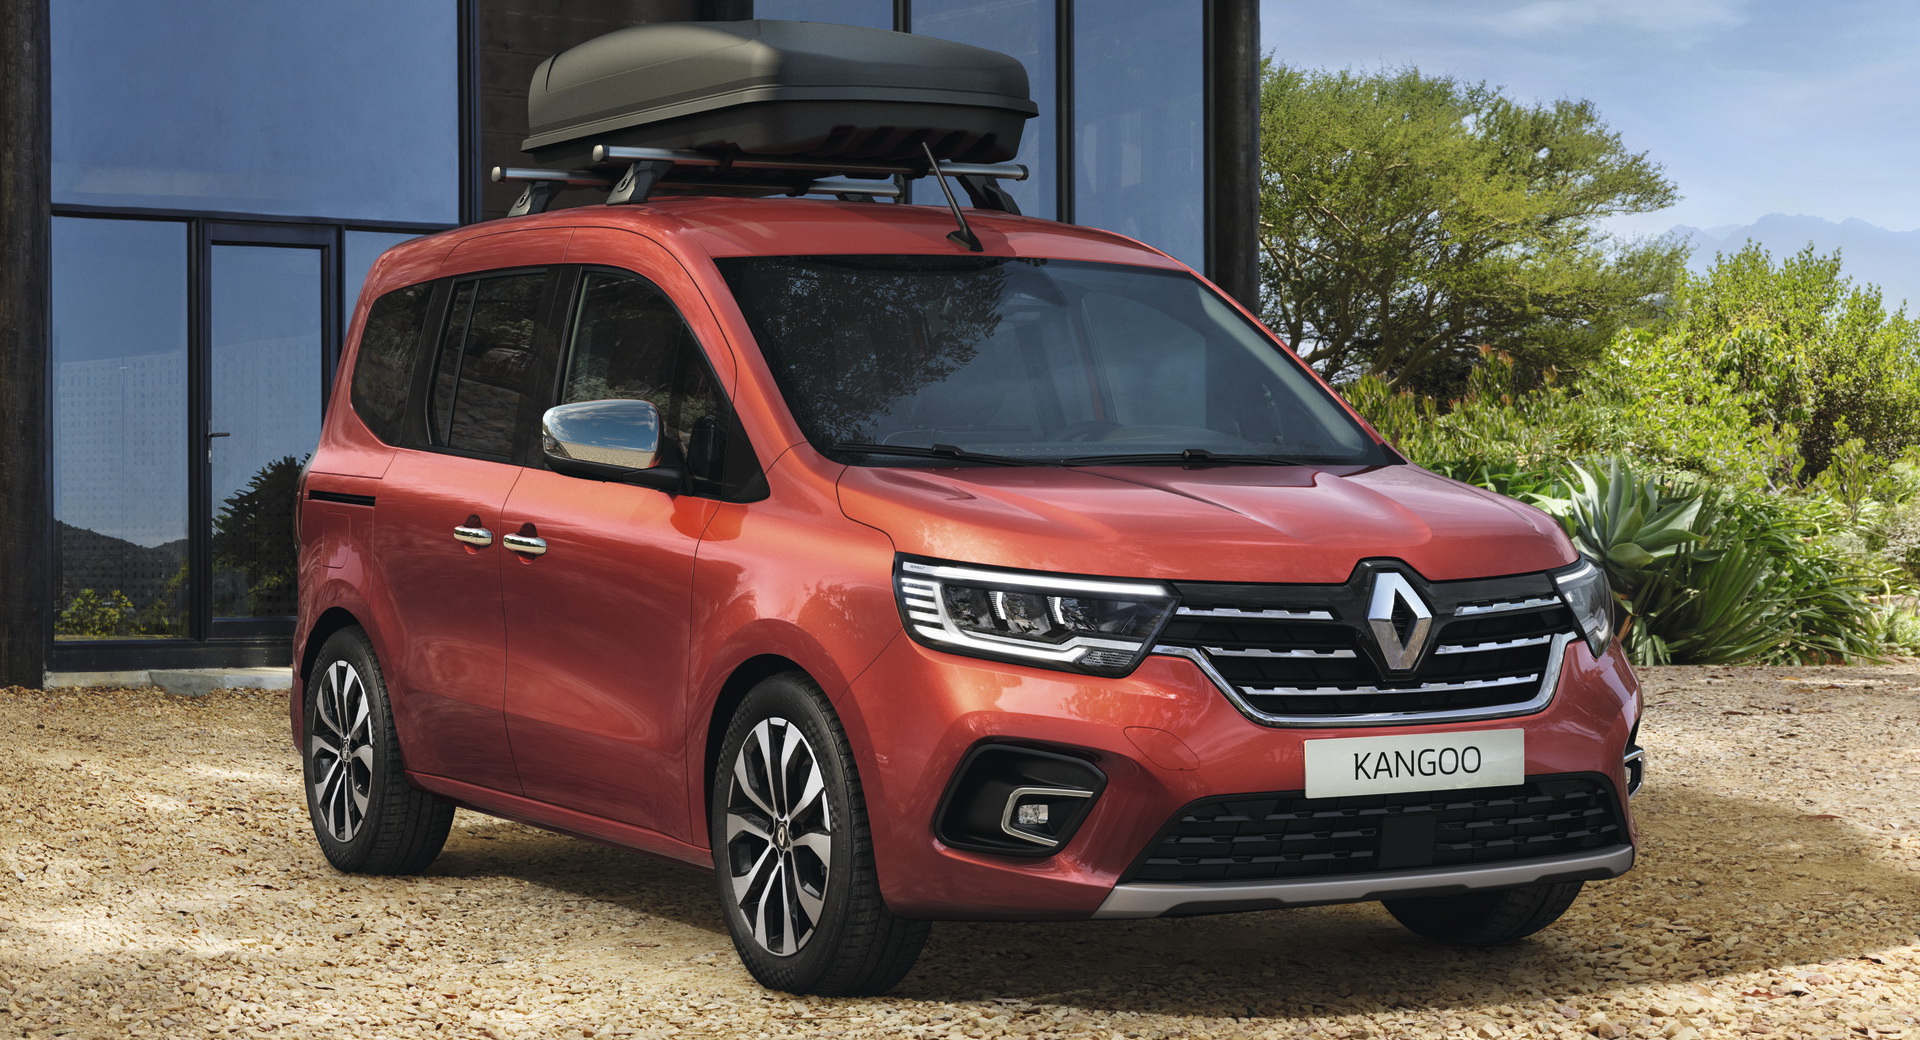 New Renault Kangoo Goes On Sale In Europe For Families With A Van